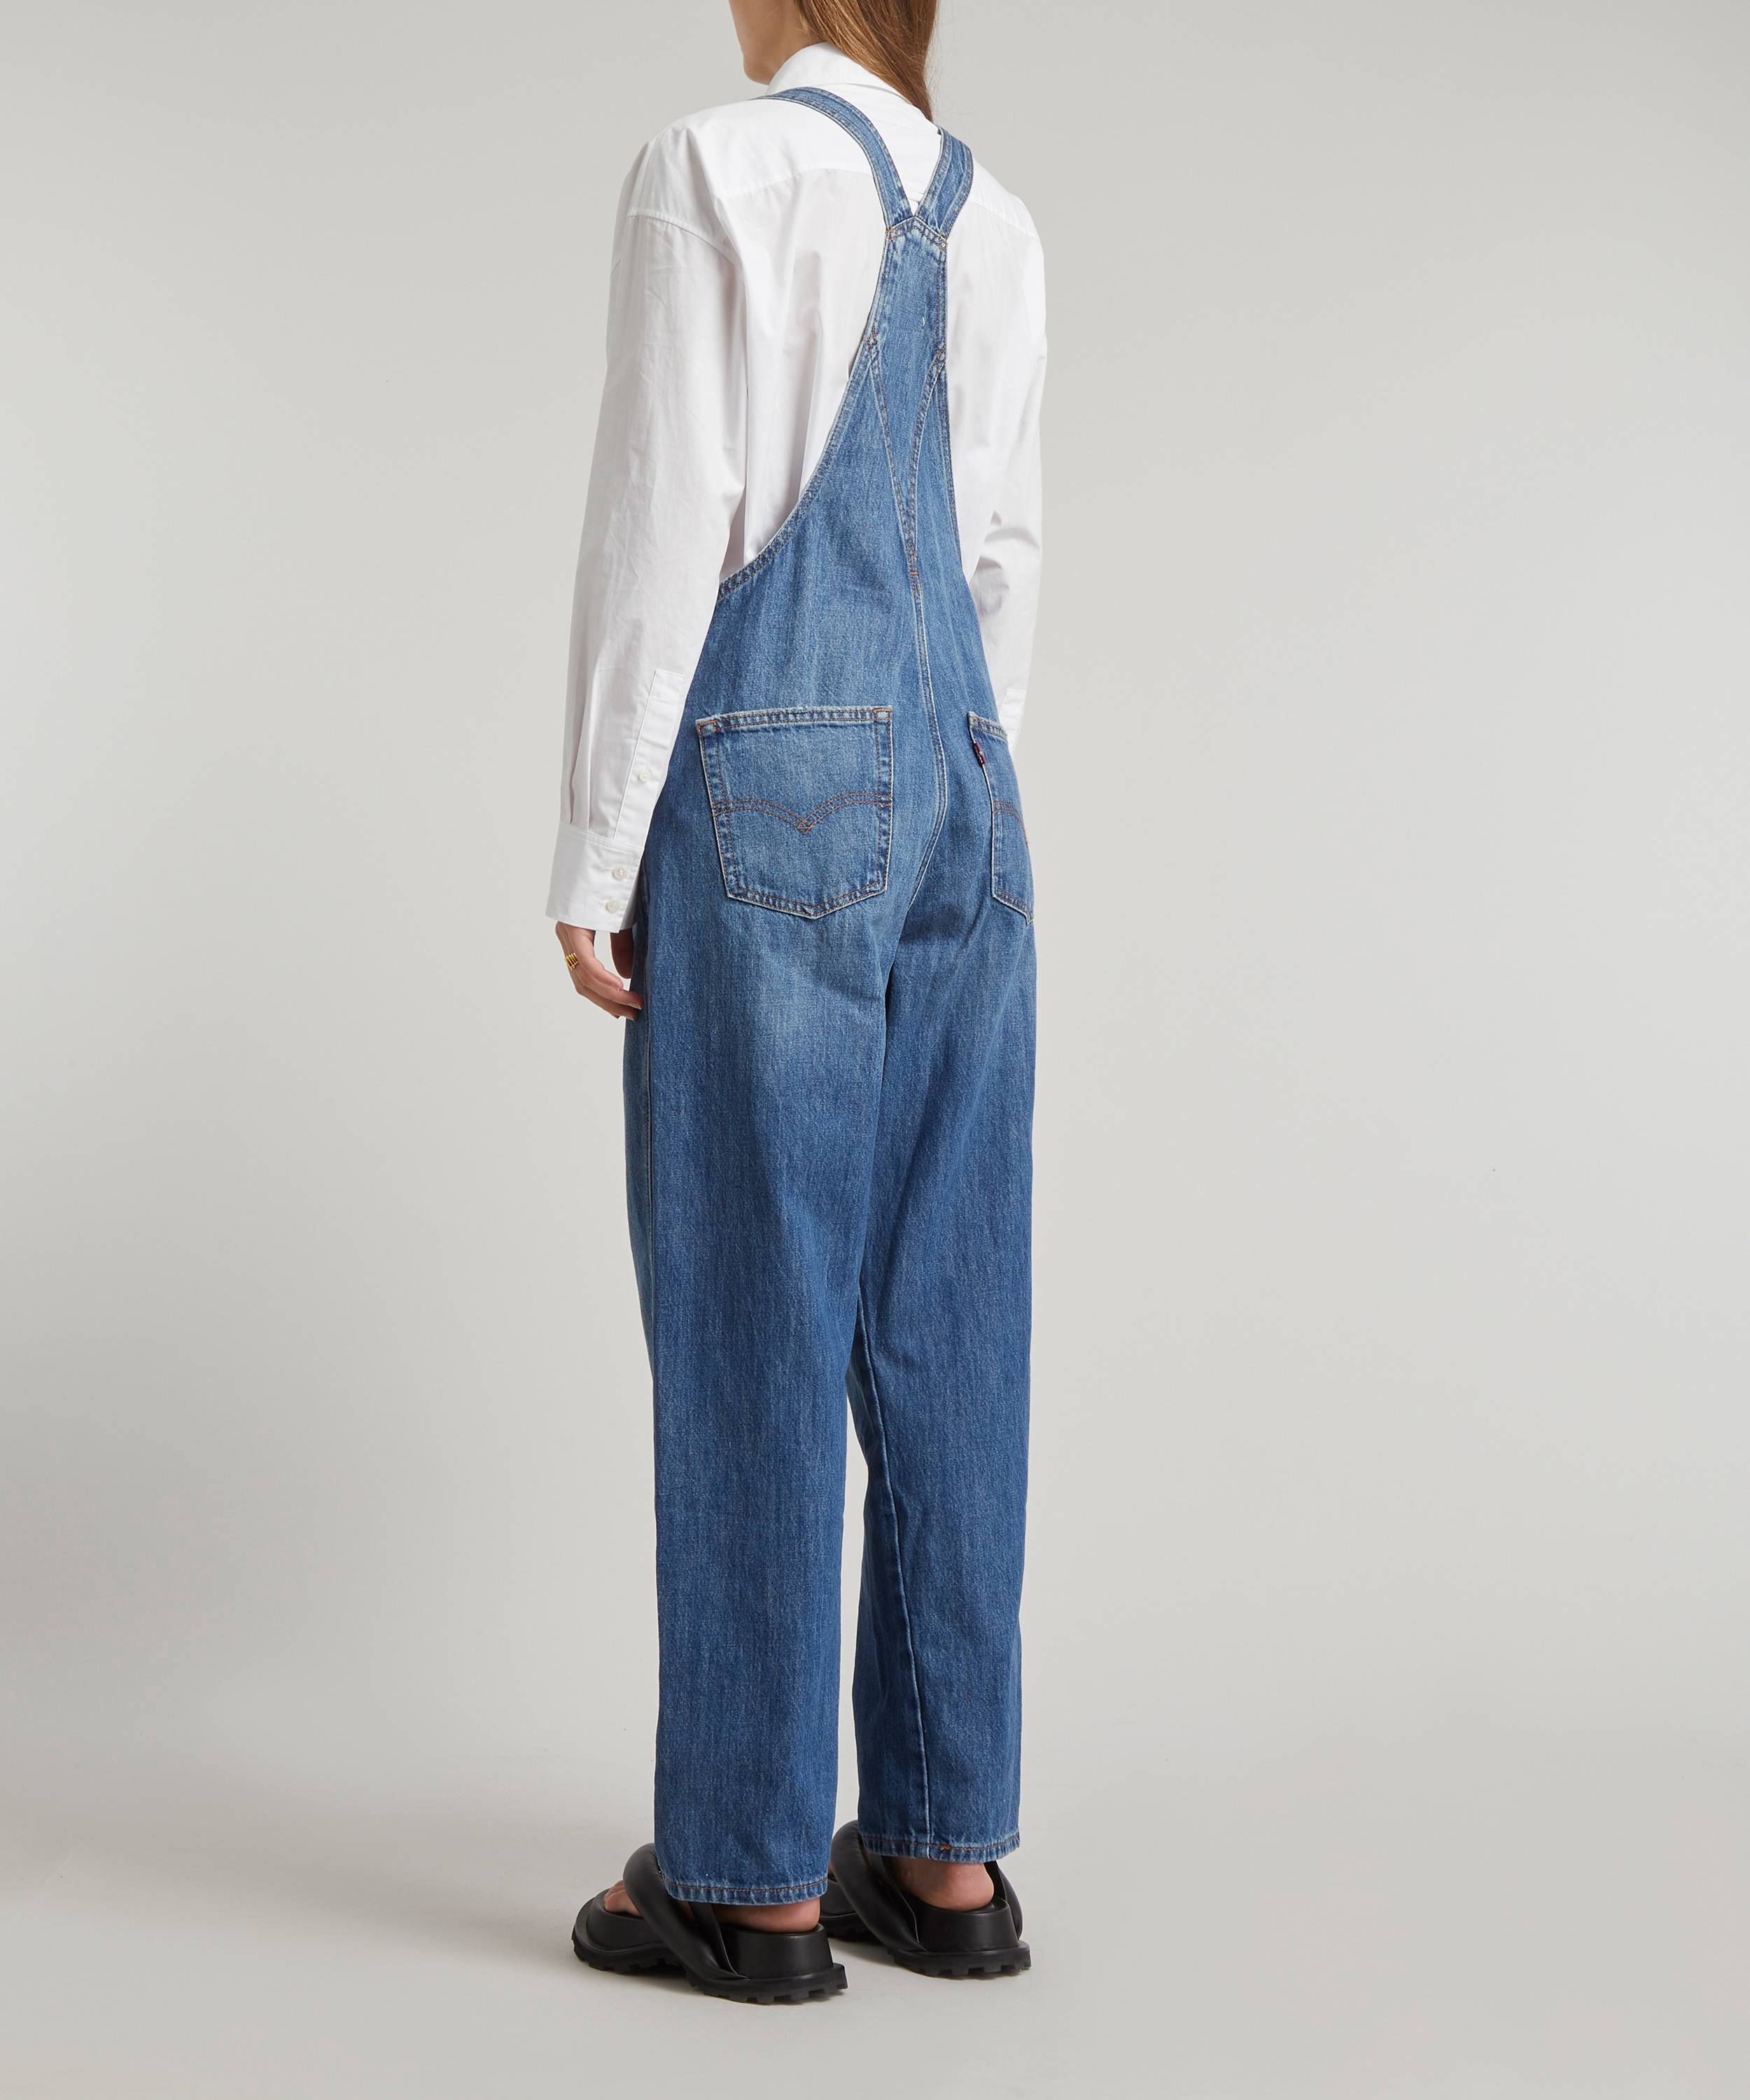 Levi's Red Tab Vintage Overalls | Liberty